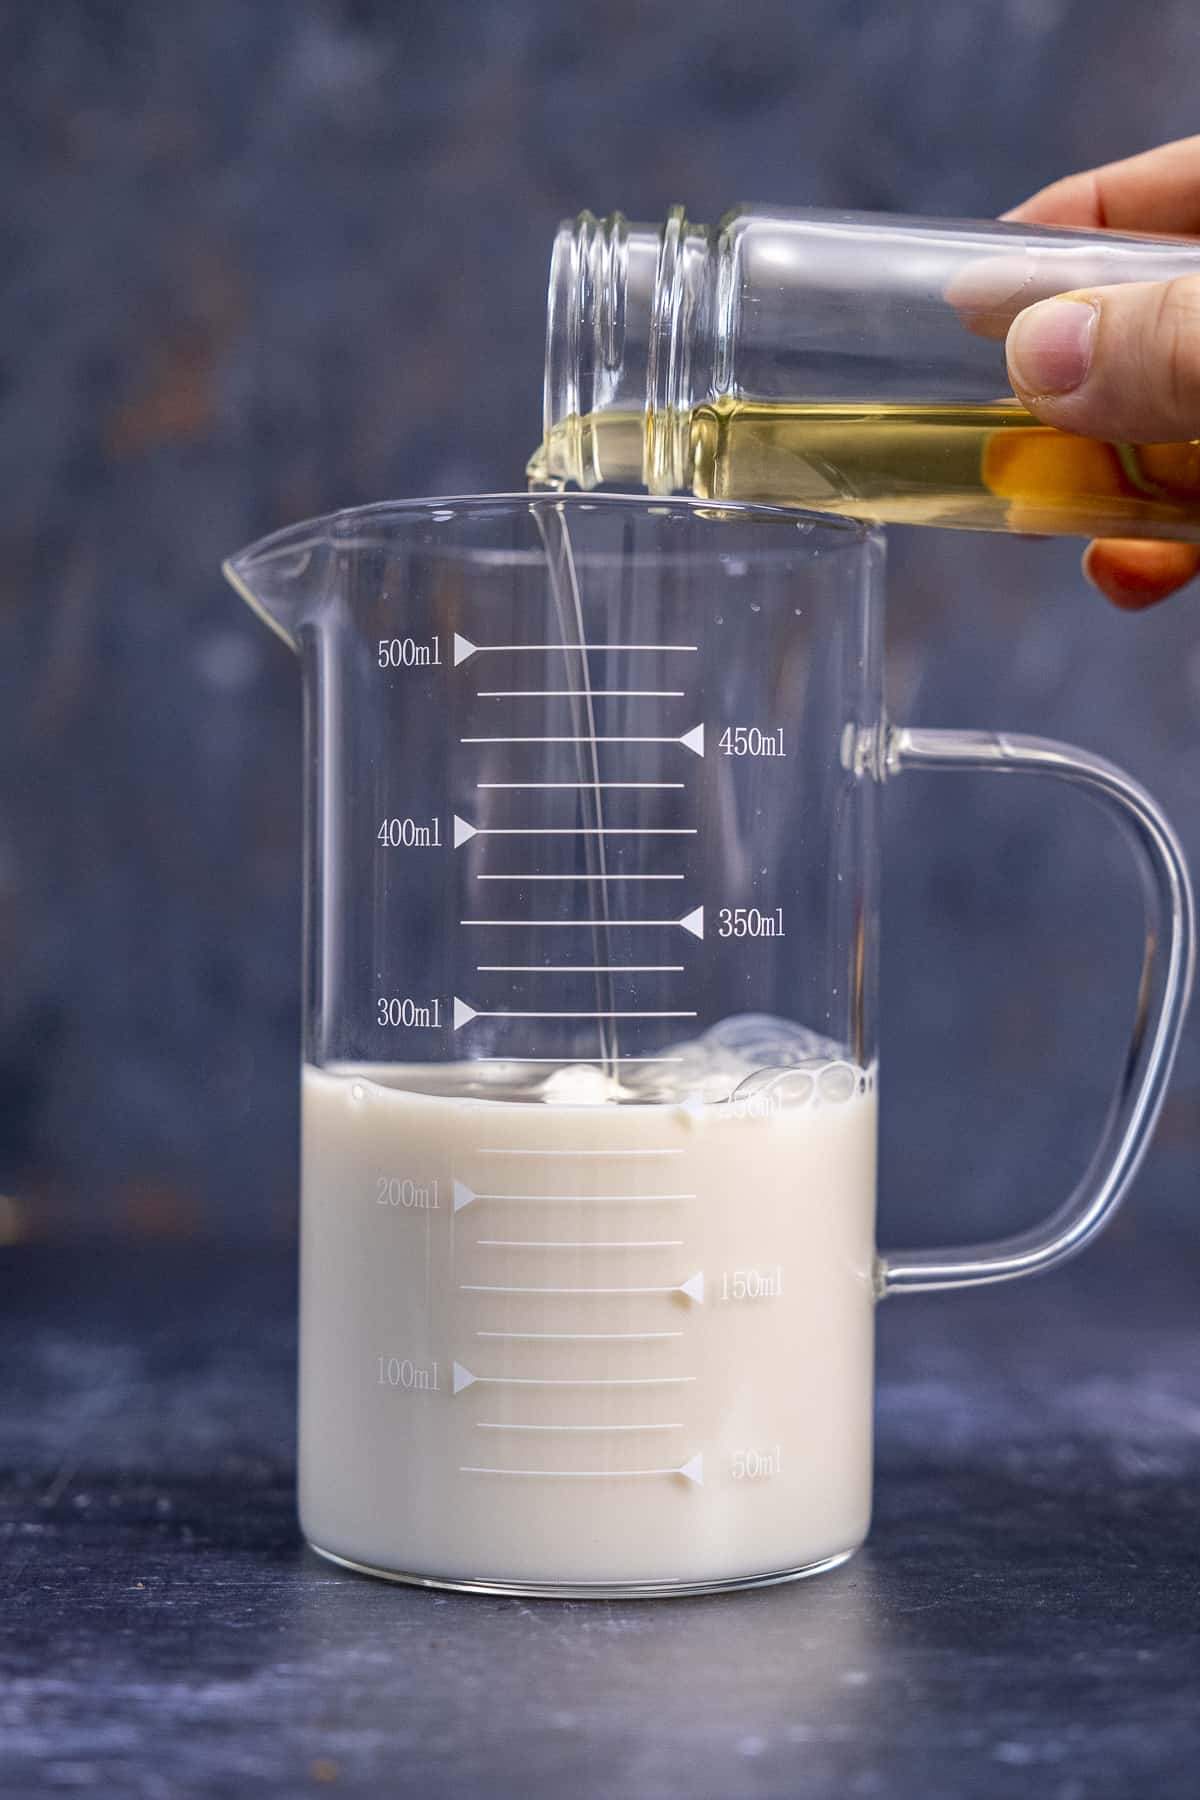 A hand pouring vinegar into almond milk in a glass measuring cup.